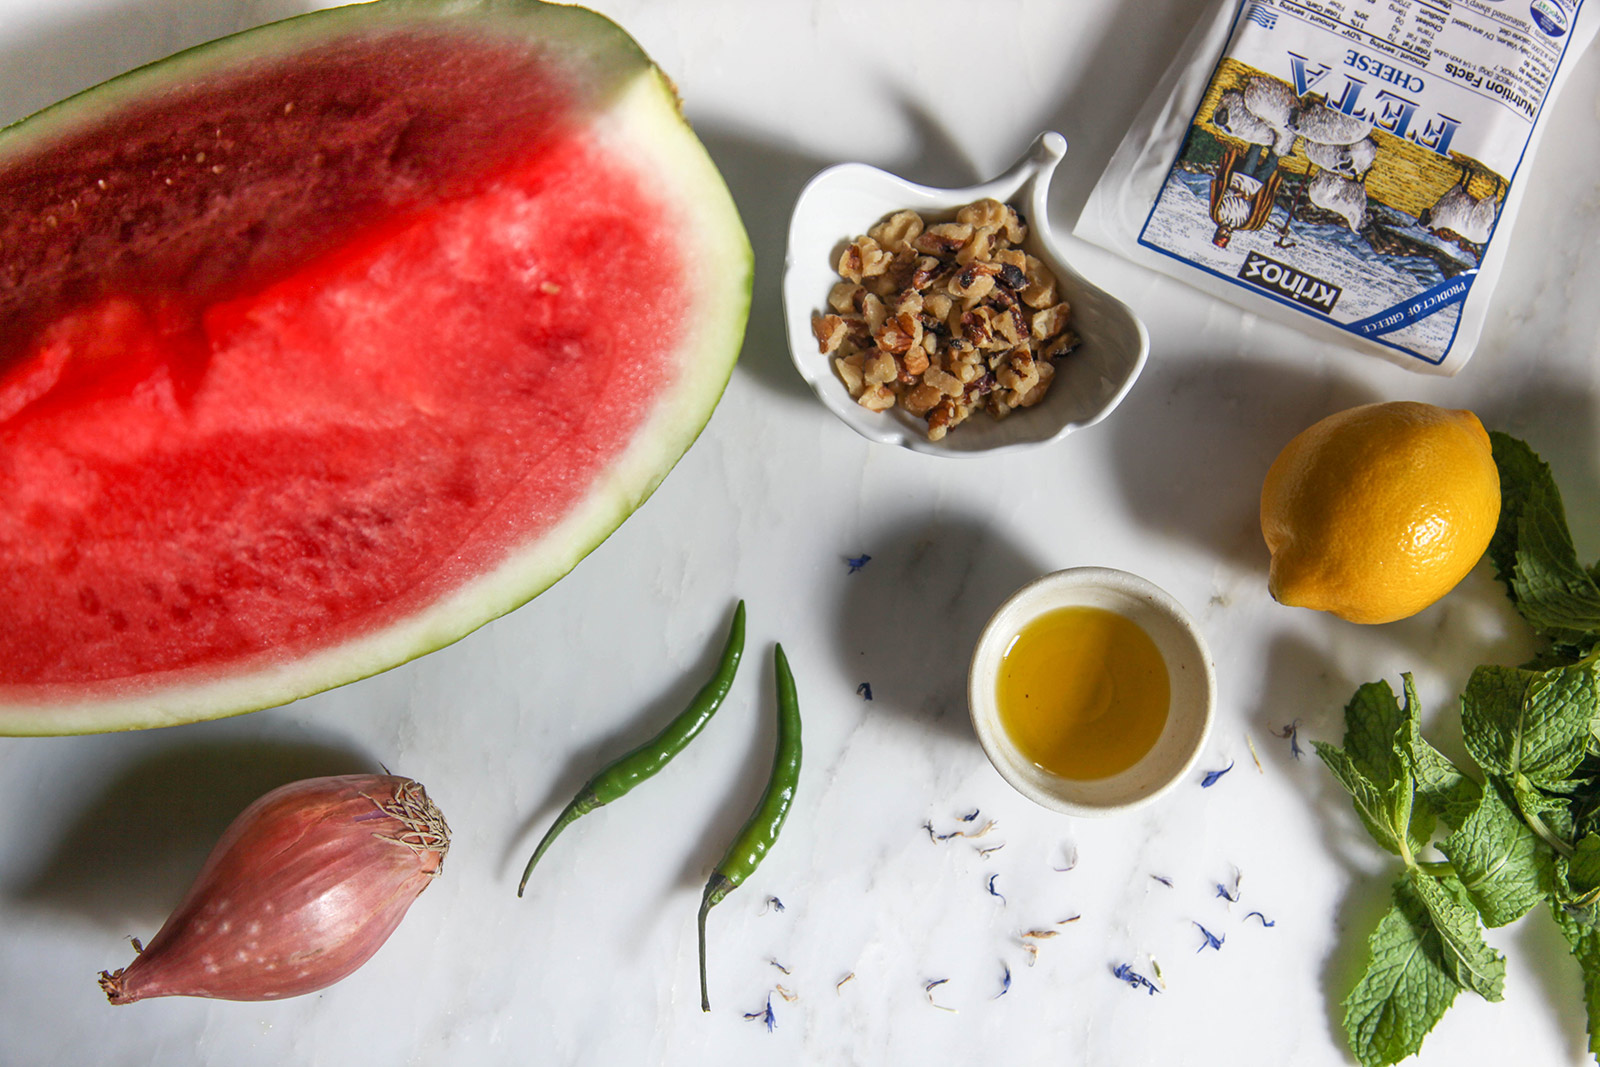 Ingredients for making Watermelon Salad with Mint, Feta, Walnuts & a Little Bit of Spicy Kick